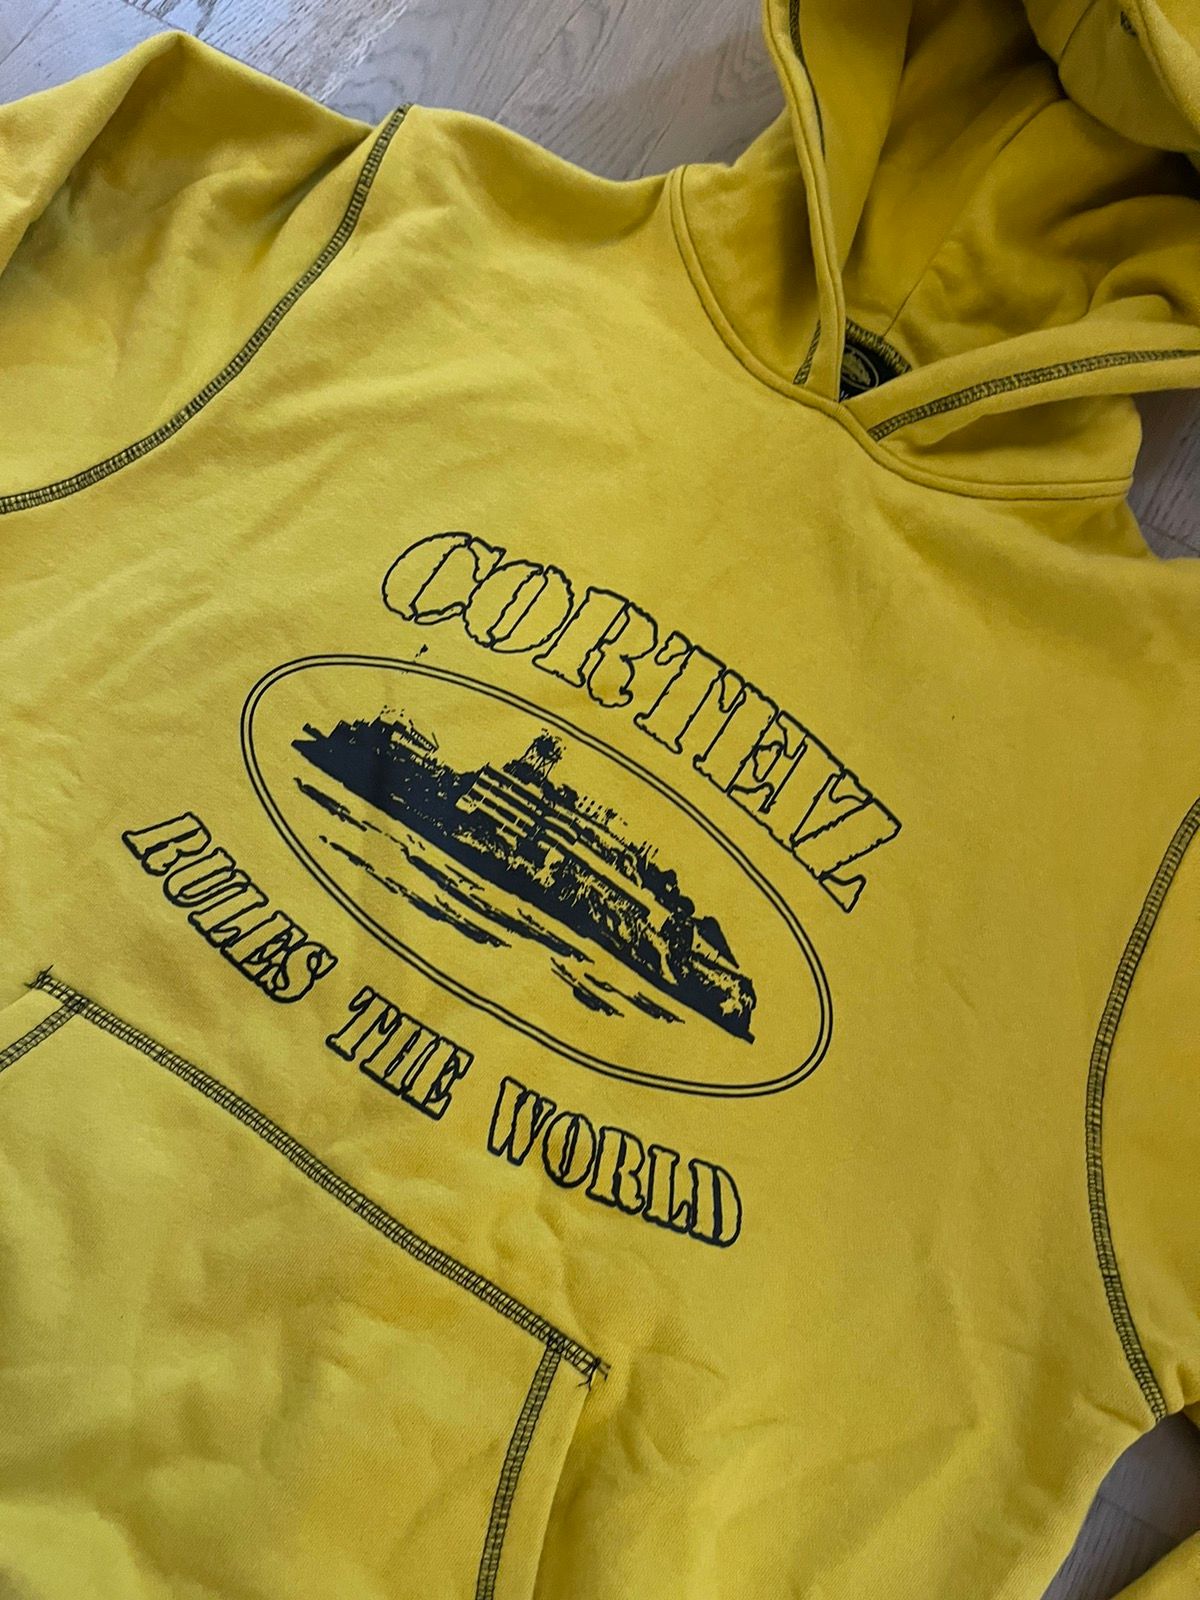 Corteiz CORTEIZ hoodie sizes shown in photos BY REAL TAPE MEASURE Size US M / EU 48-50 / 2 - 2 Preview